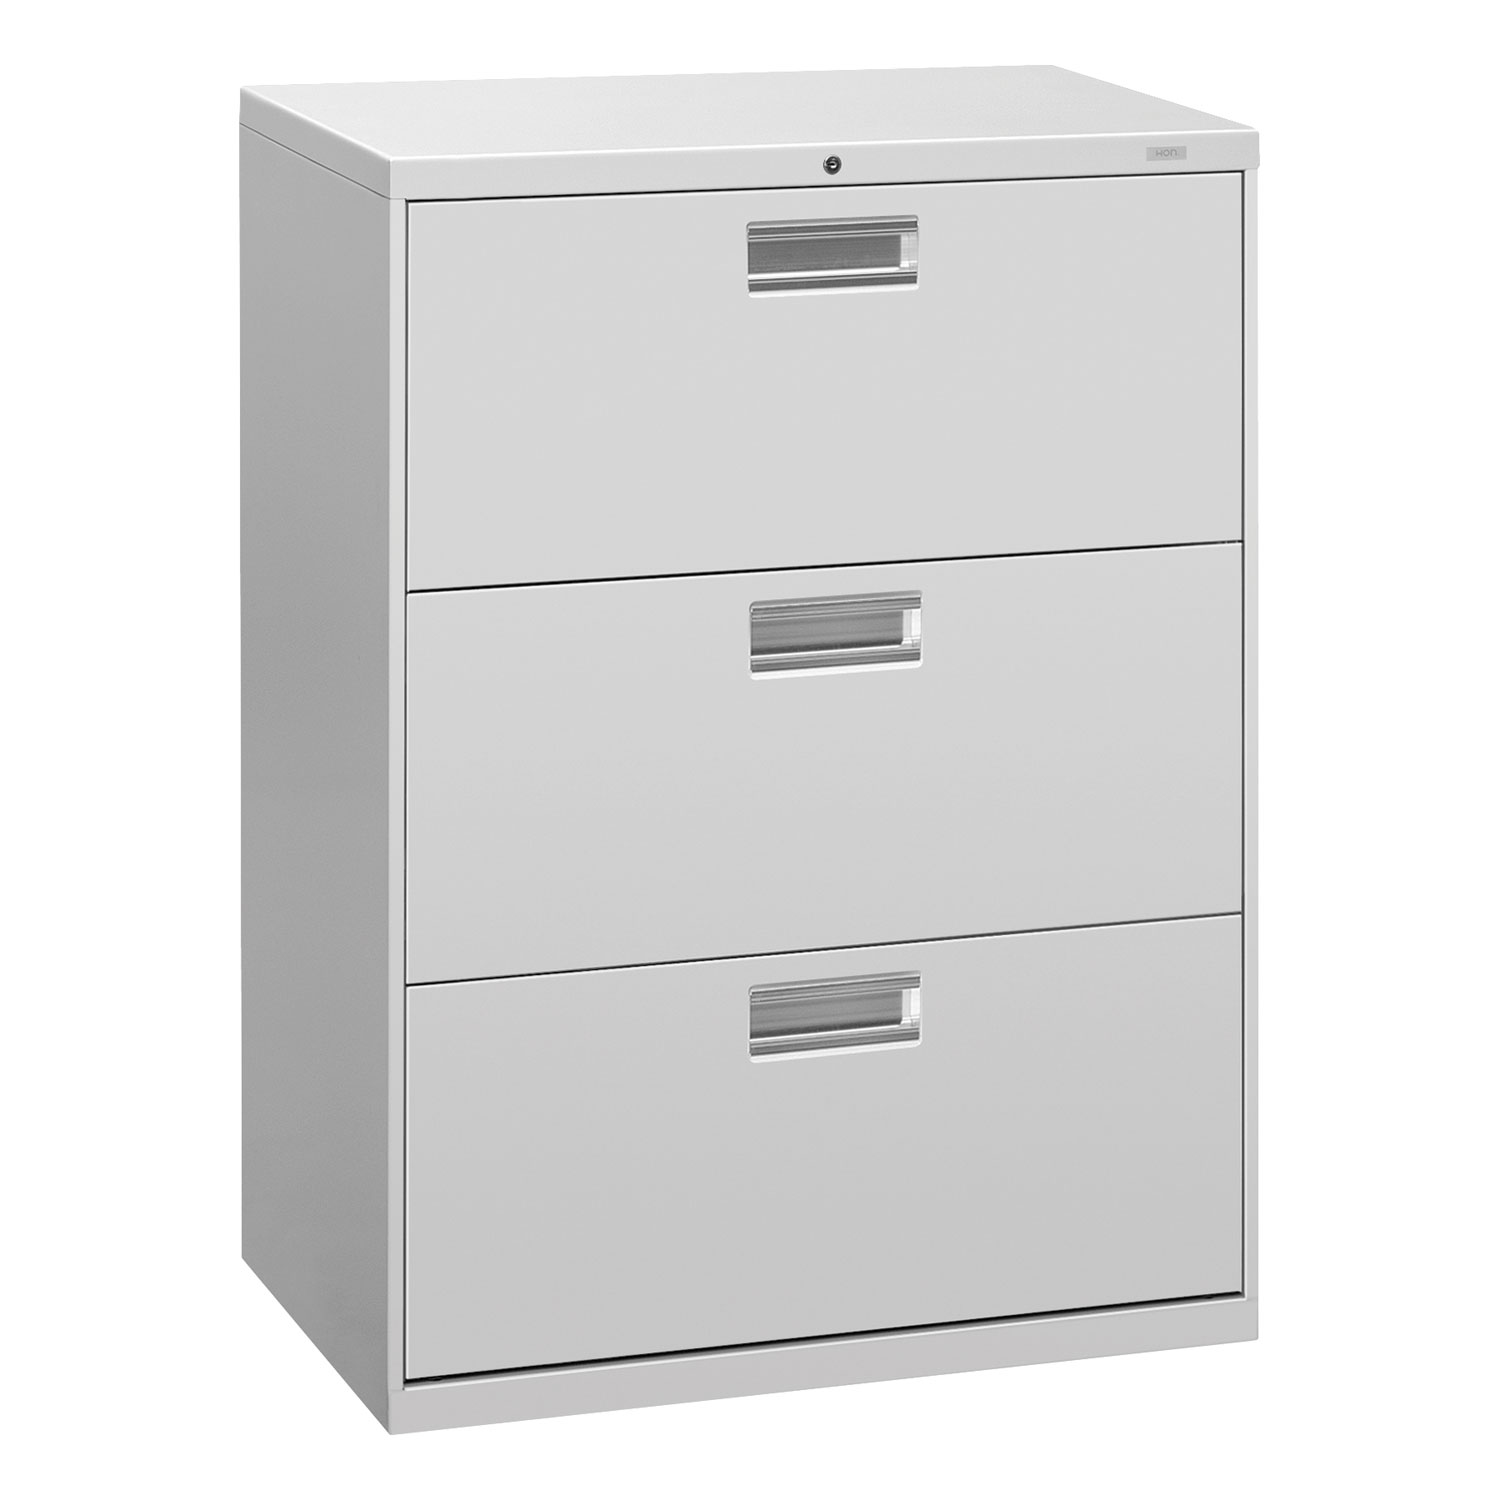 600 Series Three-Drawer Lateral File, 30w x 19-1/4d, Light Gray